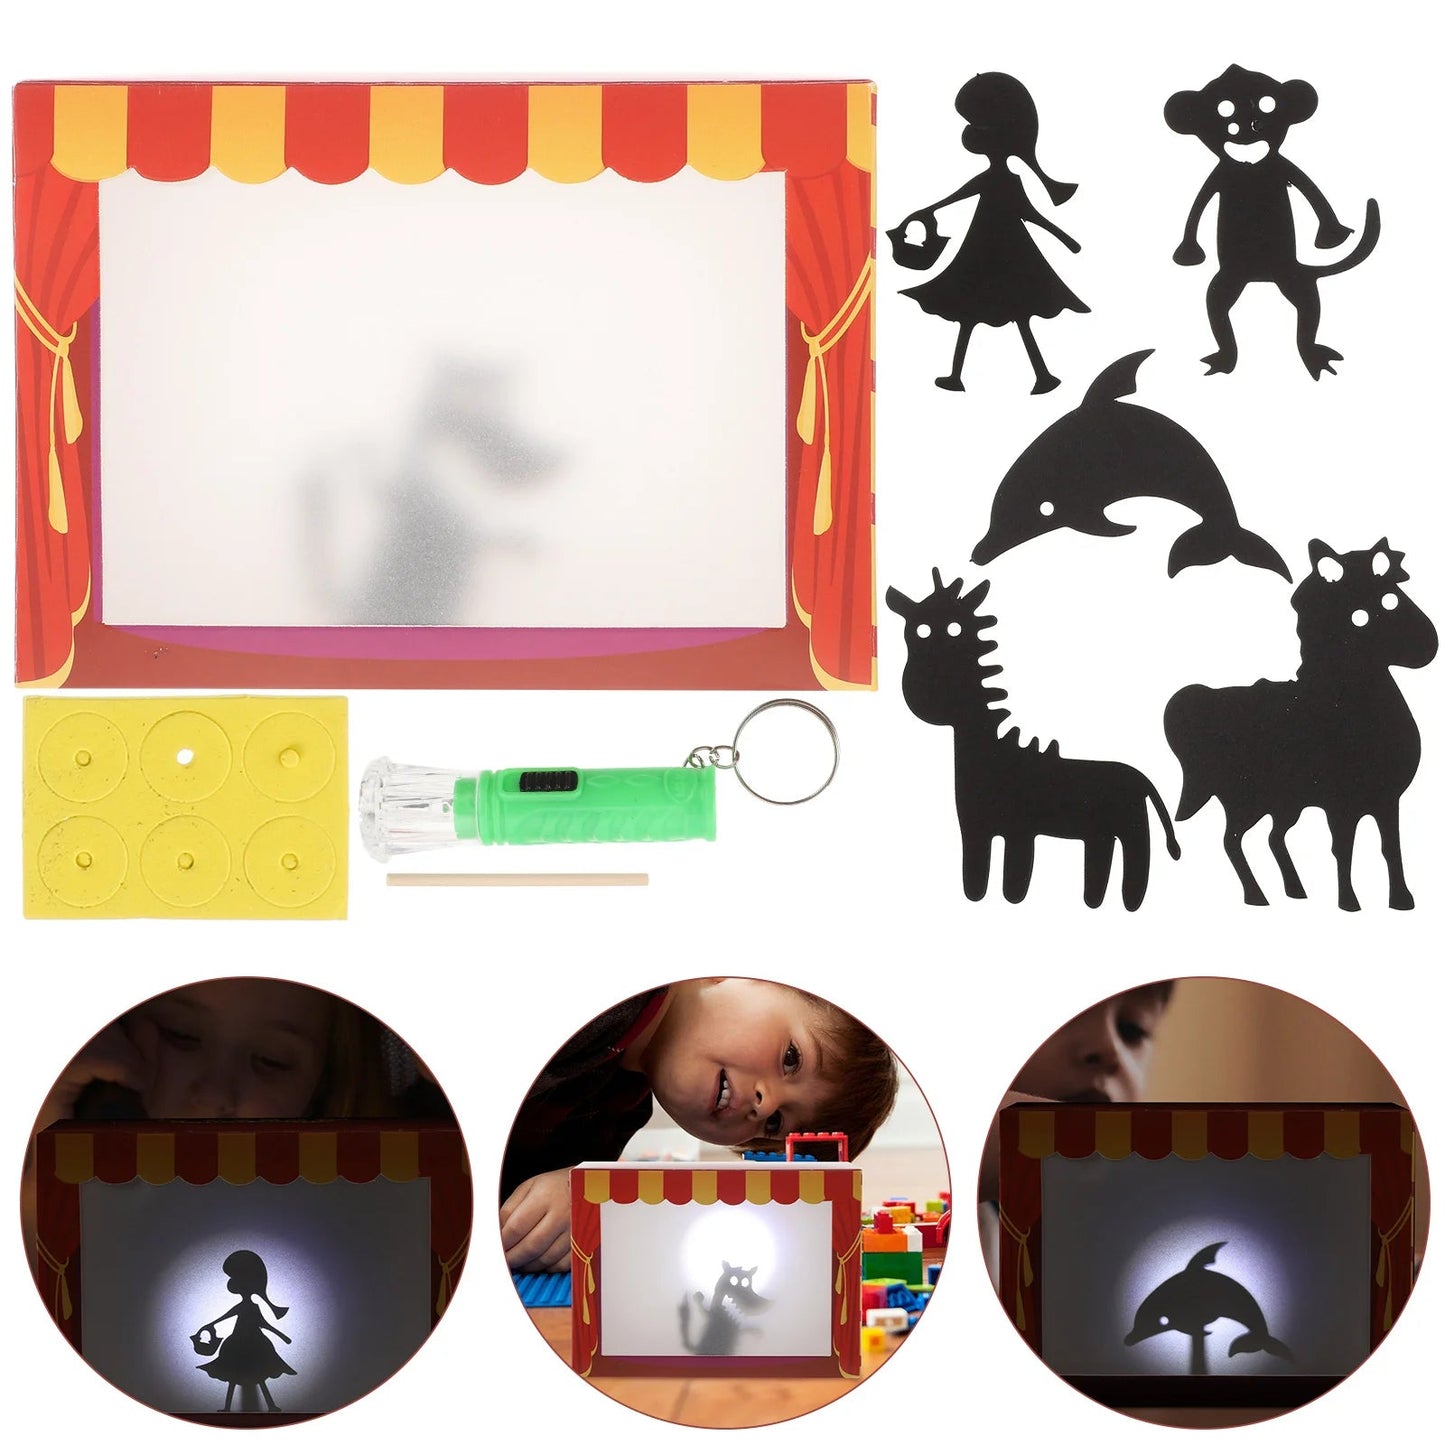 DIY Chinese Shadow Puppetry Kit with Hand and Shadow Puppets